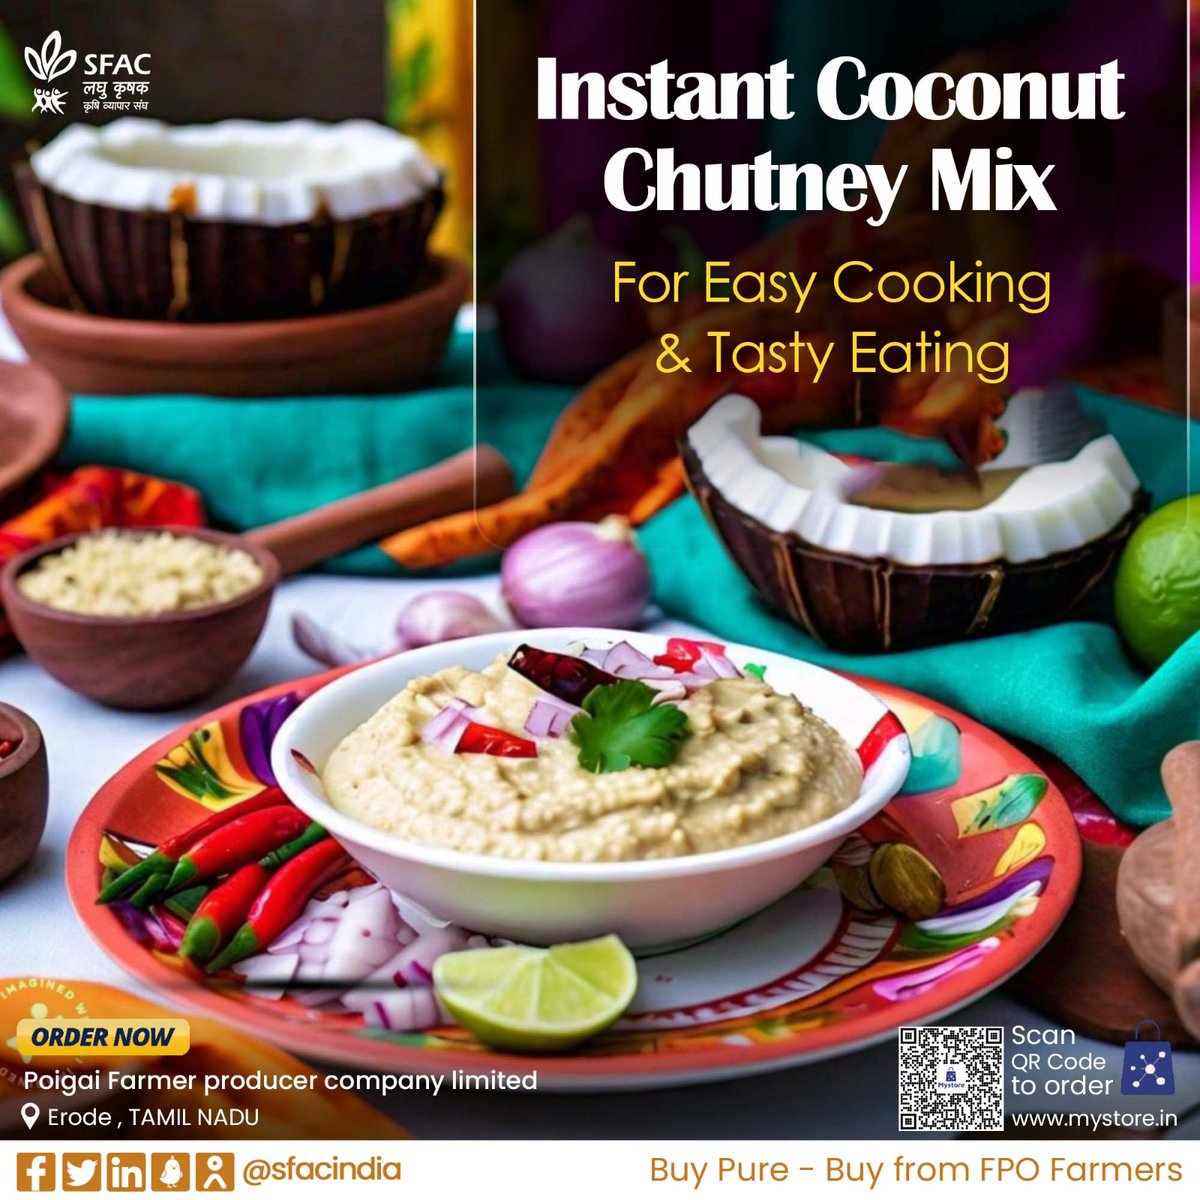 Now, enjoy the unique taste of coconut🥥 chutney readily with this instant mix. A blend of pure grated coconut, spices, & herbs makes your meals delicious.

Buy from FPO farmers at👇

mystore.in/en/product/763…

😋
@AgriGoI @ONDC_Official @PIB_India @mygovindia #VocalForLocal #tasty